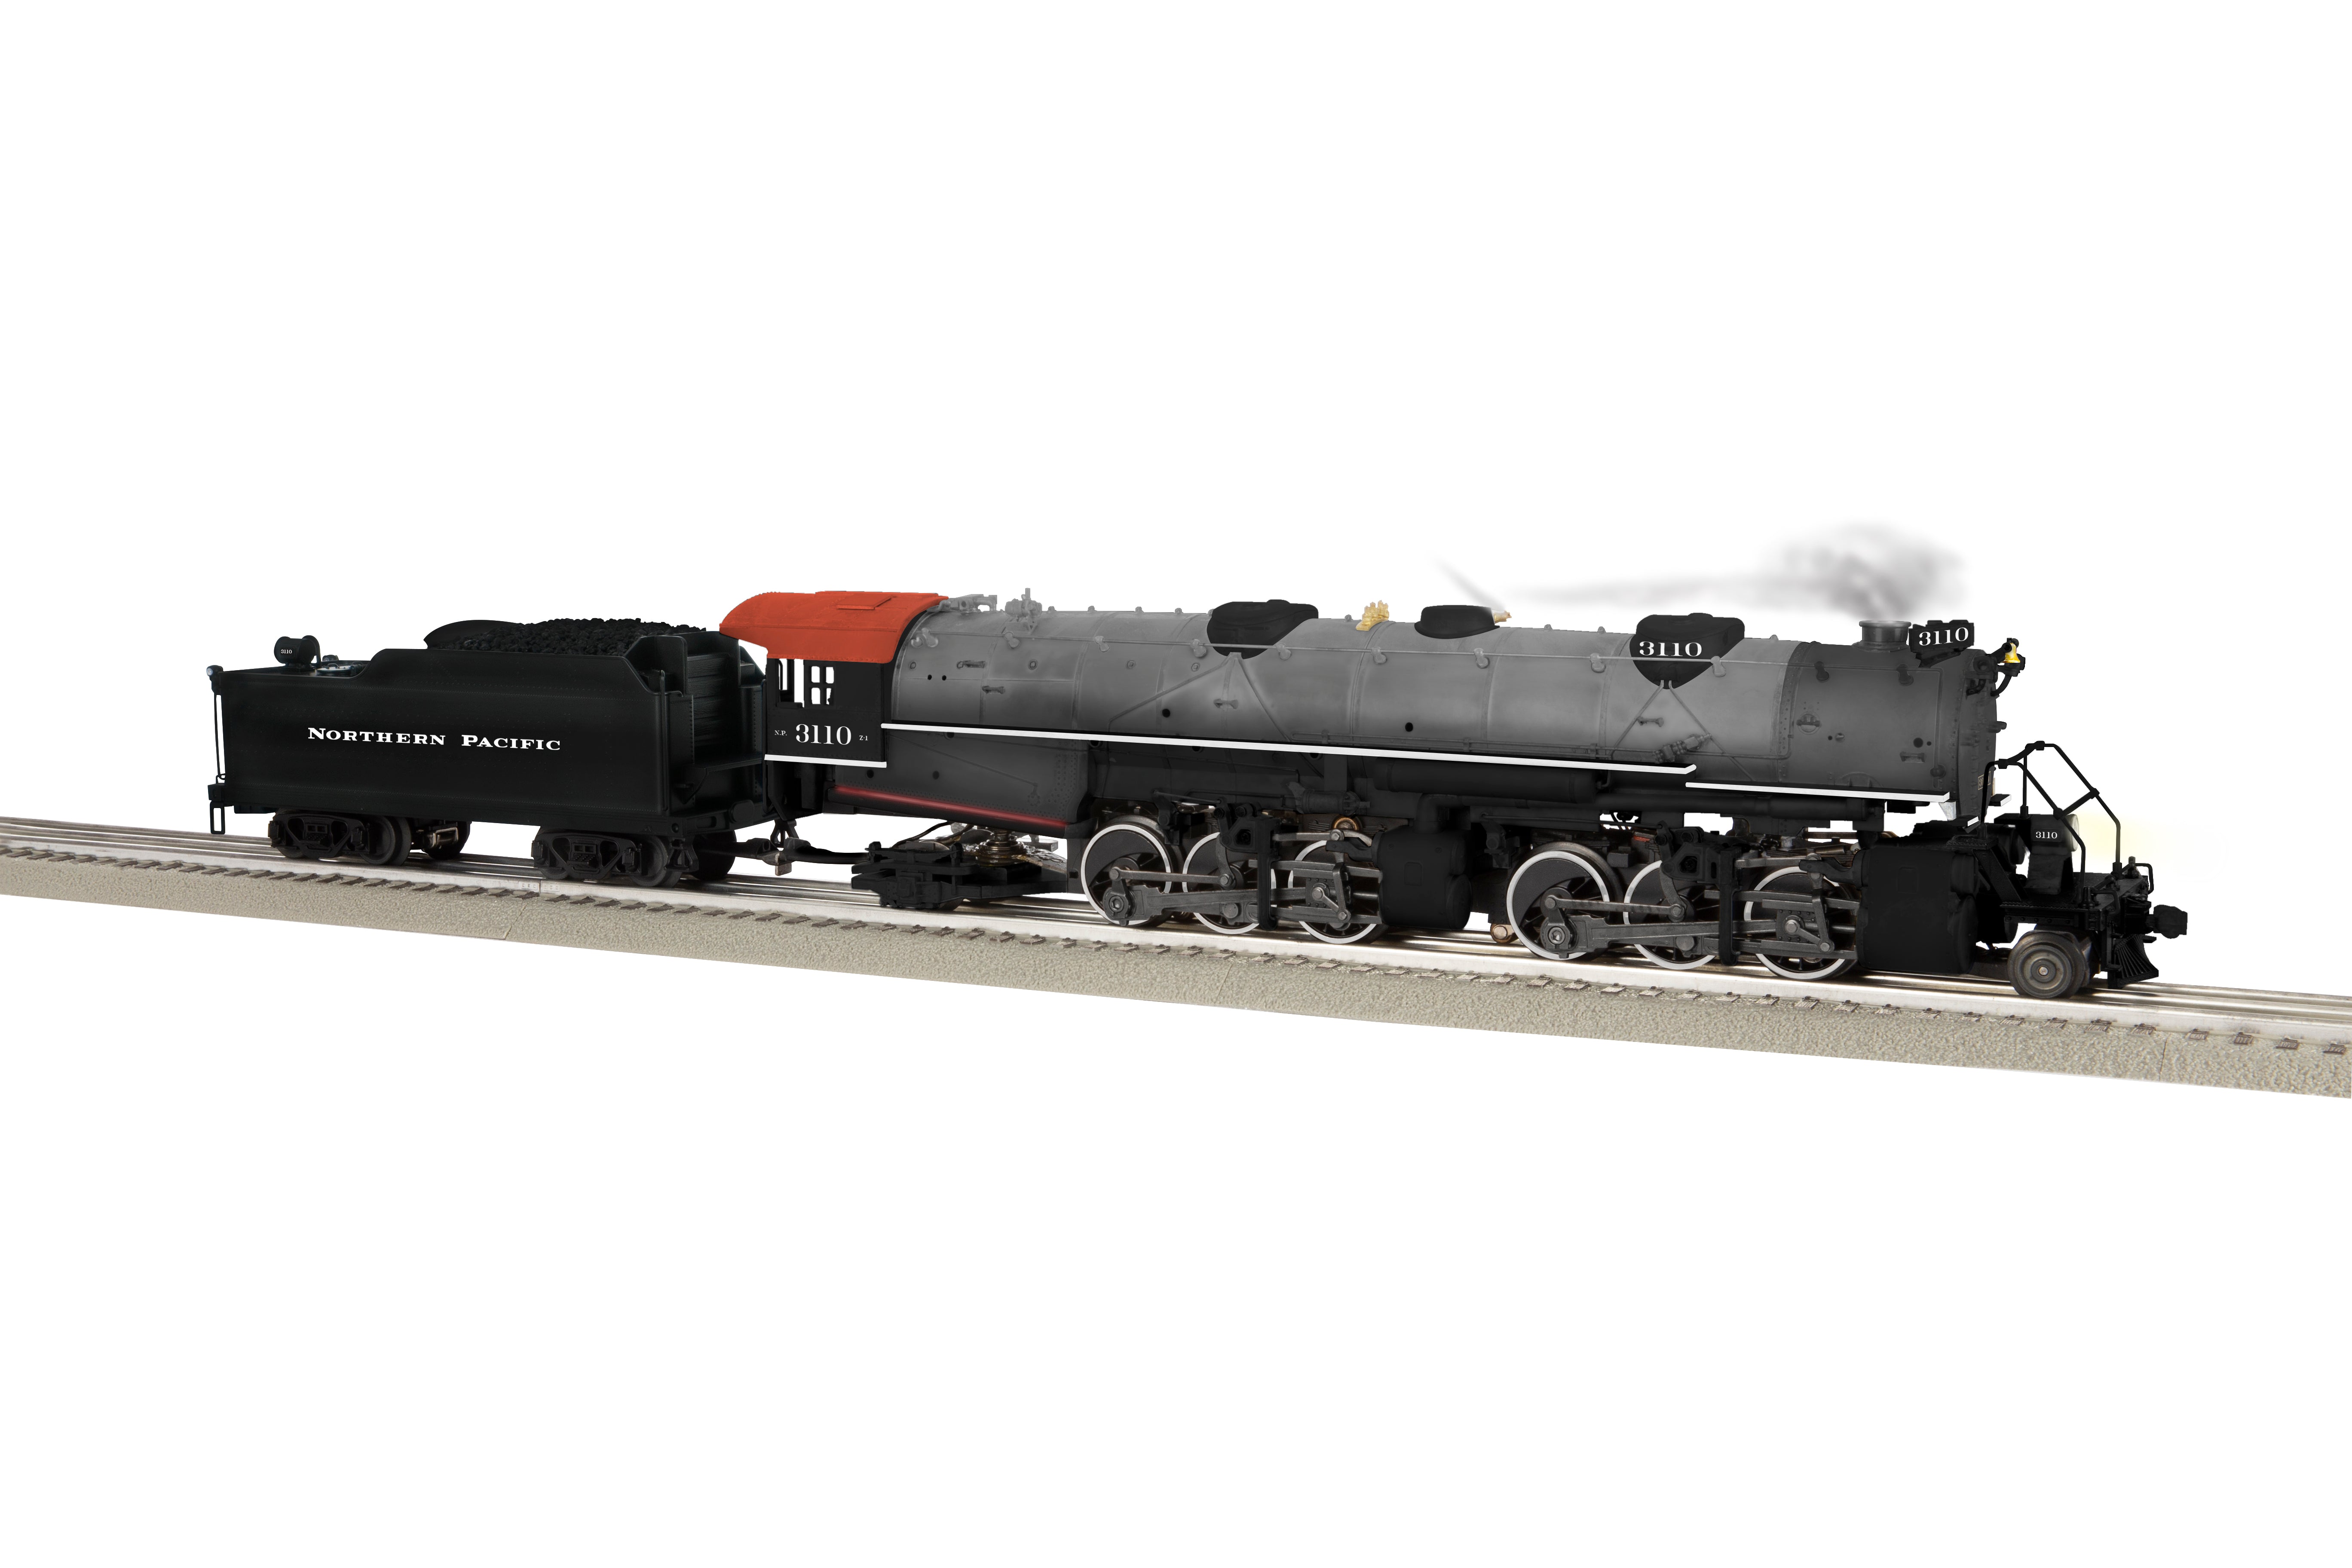 Lionel 2431220 - Legacy 2-6-6-2 Steam Engine "Northern Pacific" #3110